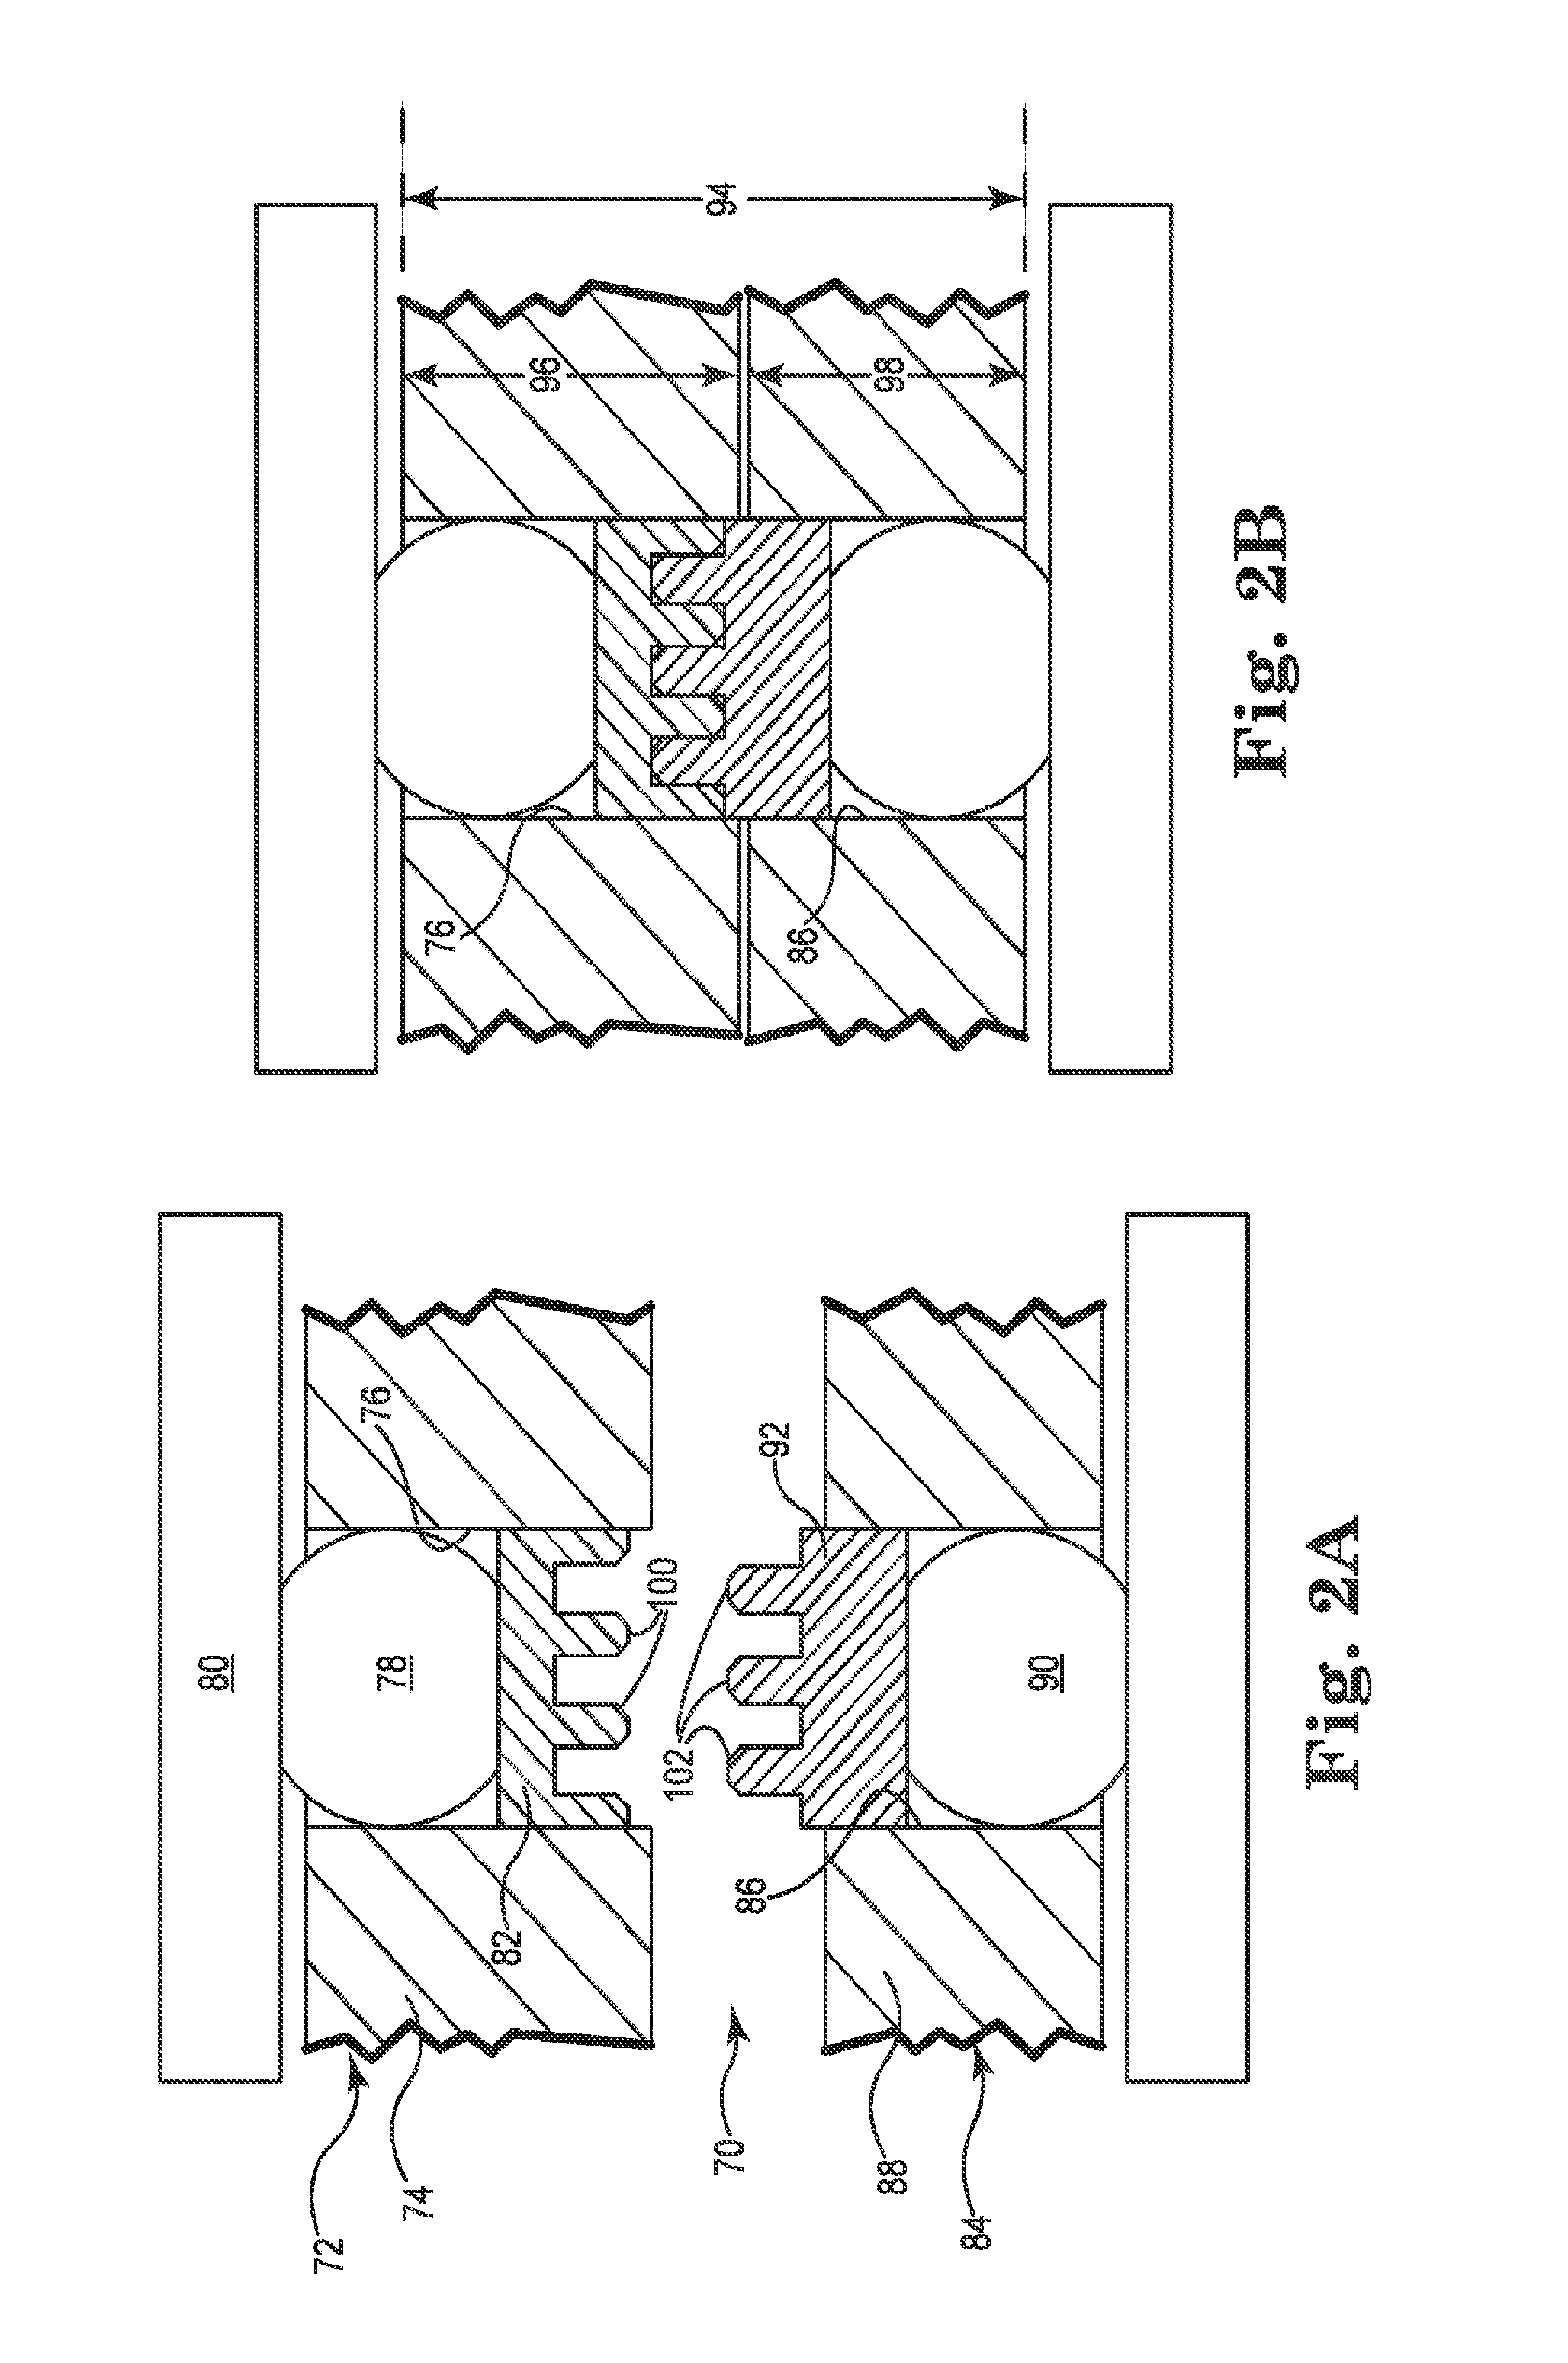 Semiconductor device package adapter